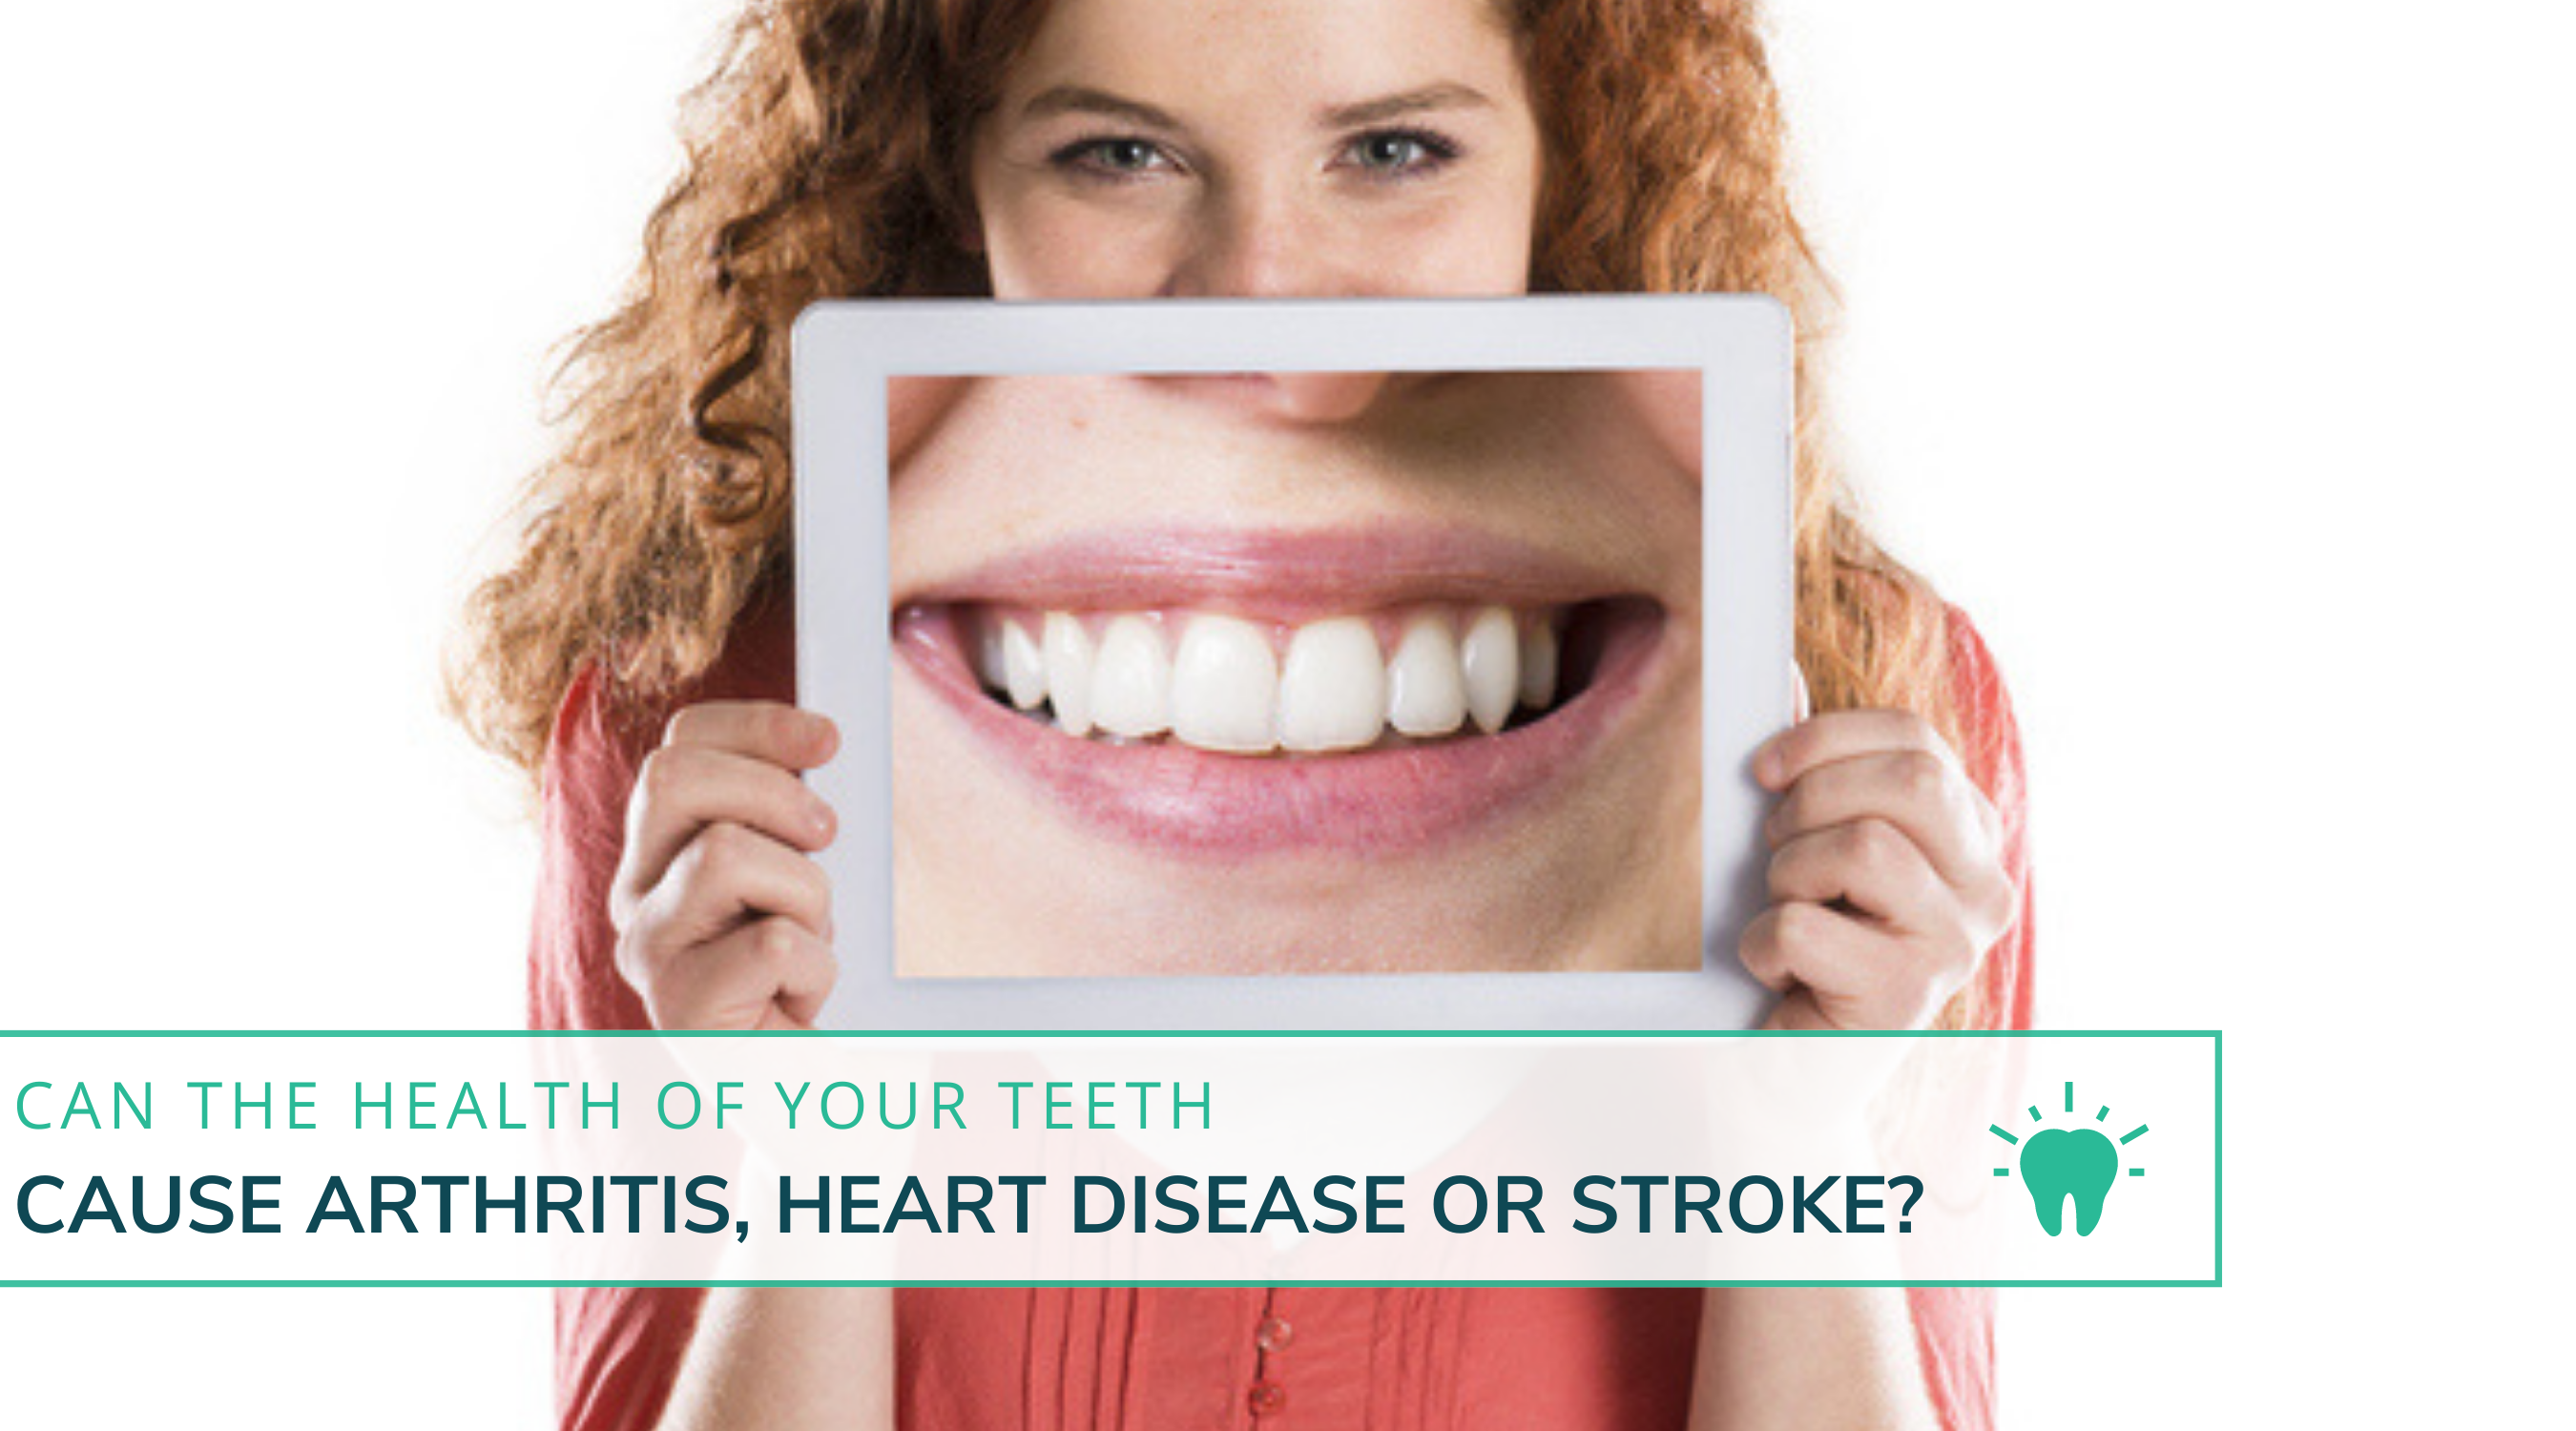 Can the Health of Your Teeth Cause Arthritis, Heart Disease, or a Stroke?